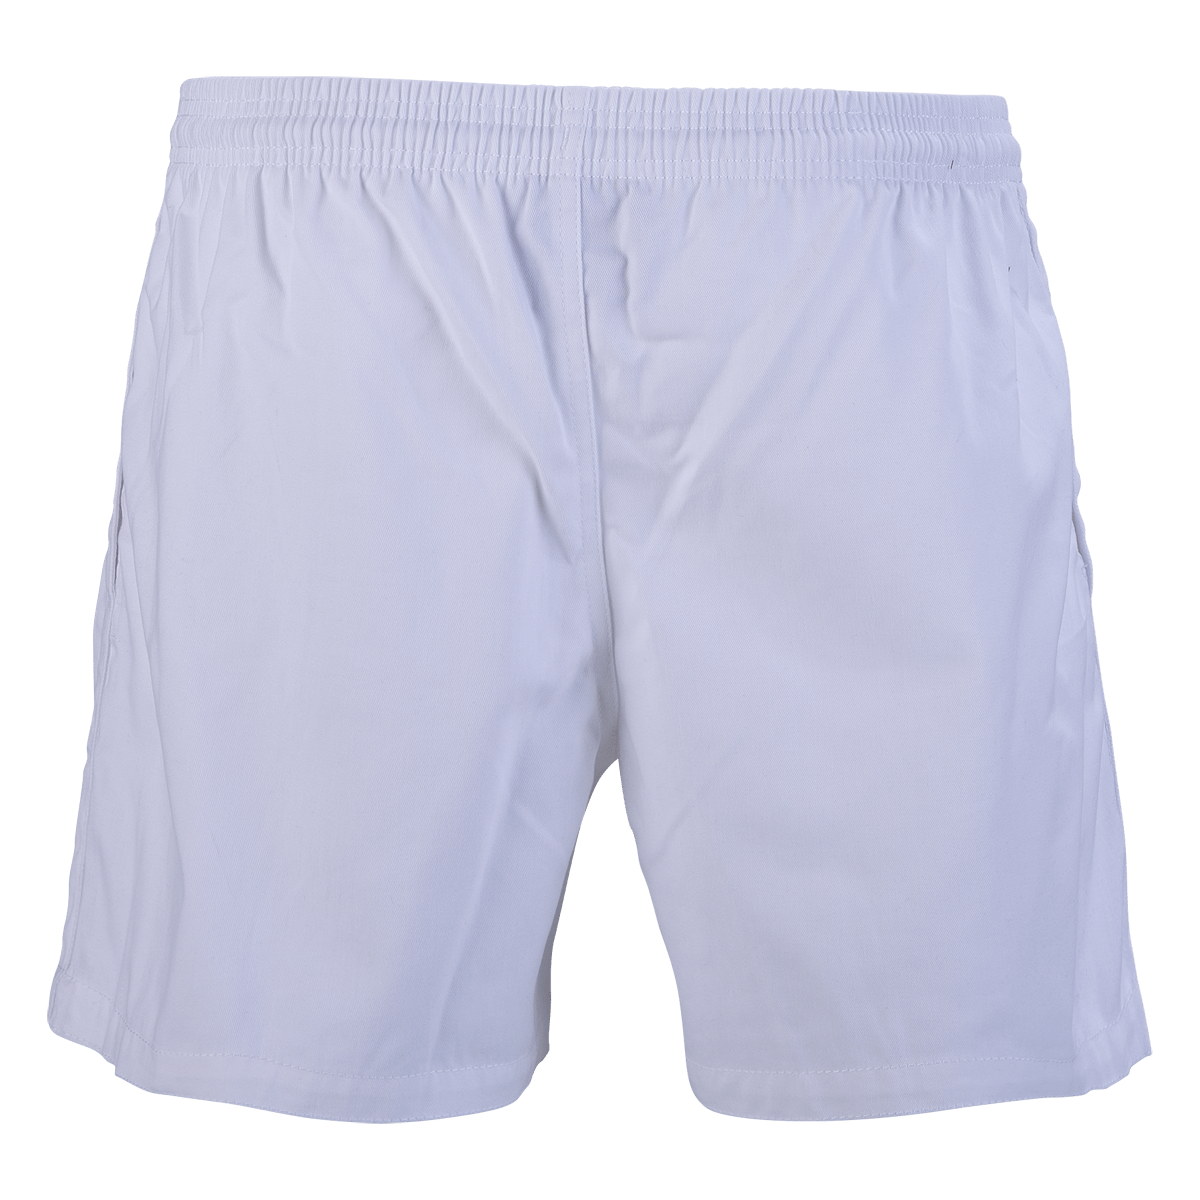 Gilbert Kiwi Pro Rugby Shorts - World Rugby Shop